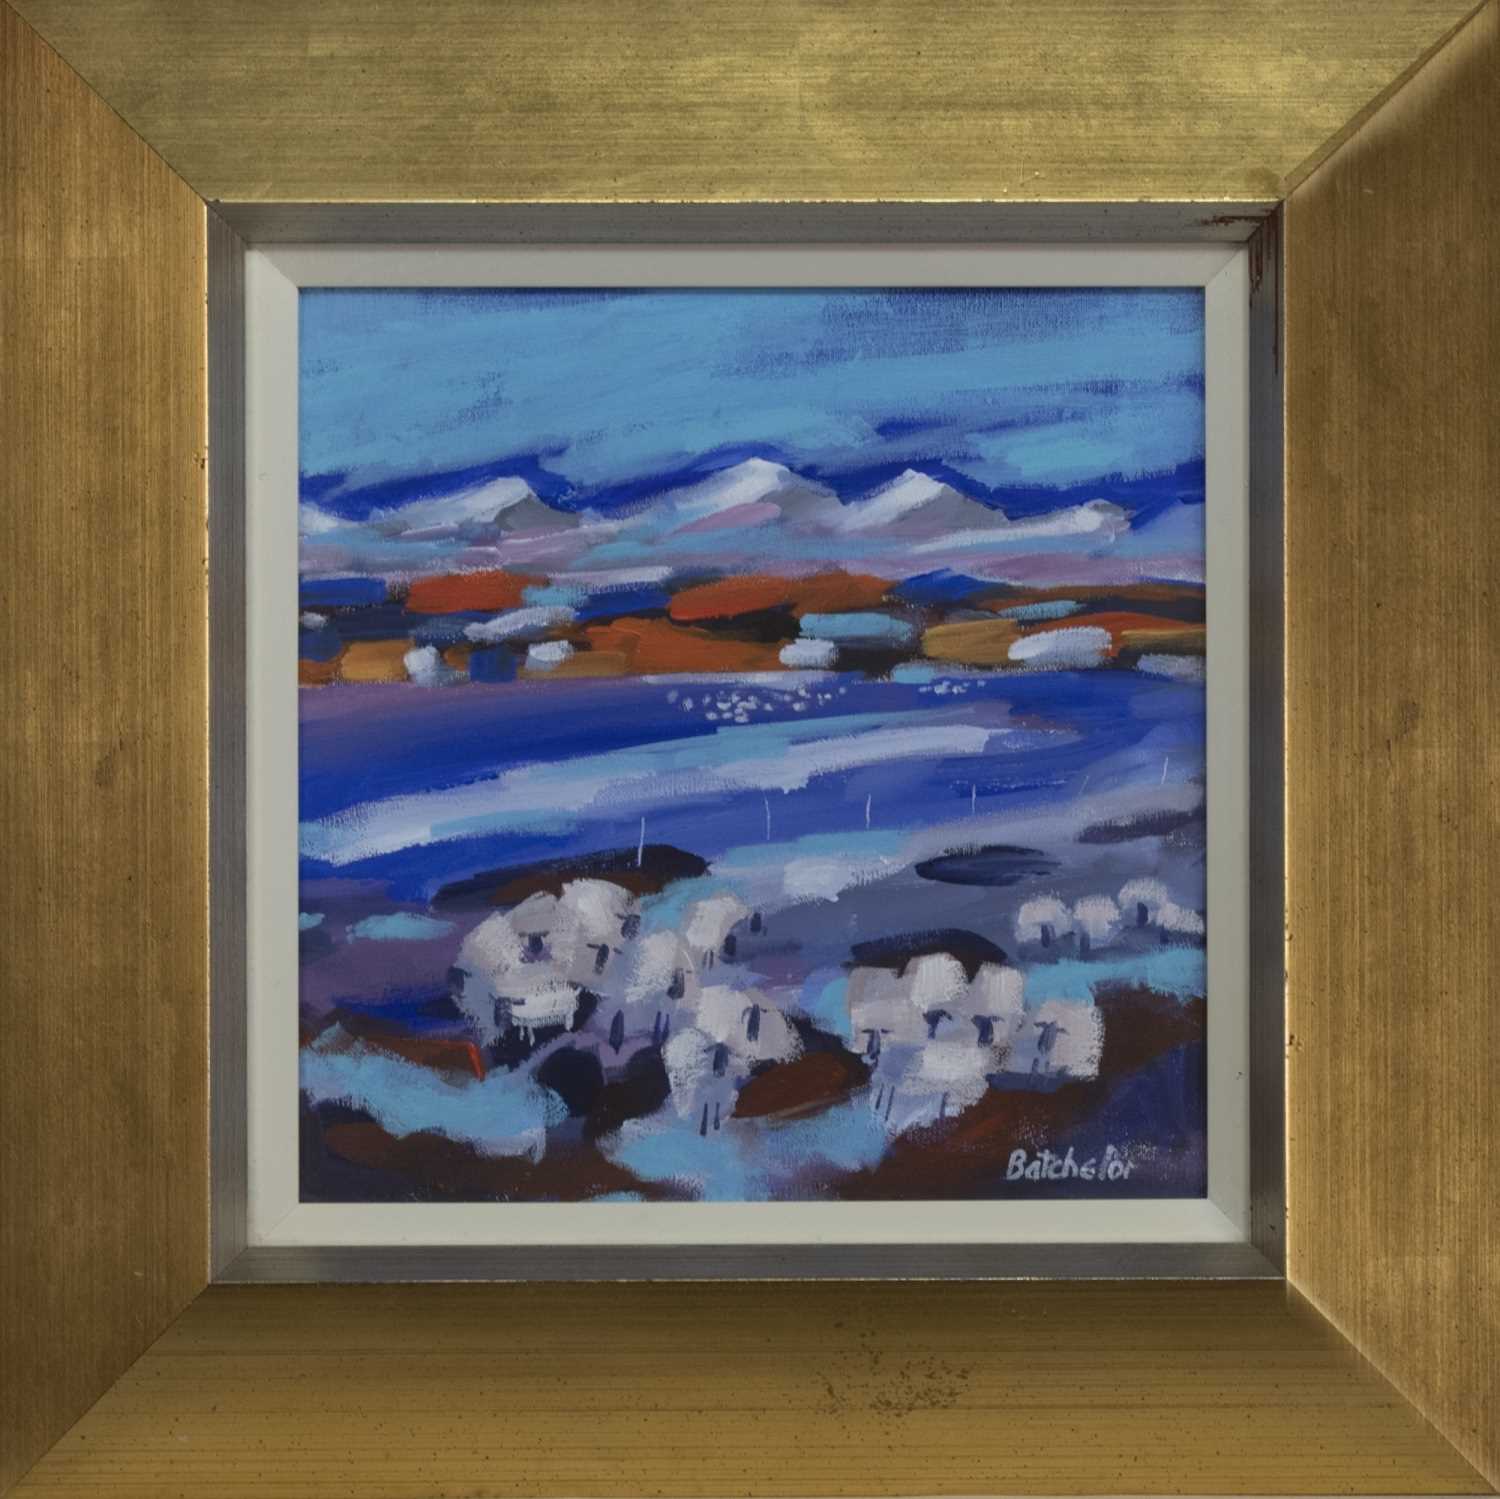 Lot 523 - LATE SNOWS, PERTHSHIRE II, AN ACRYLIC BY MARY BATCHELOR